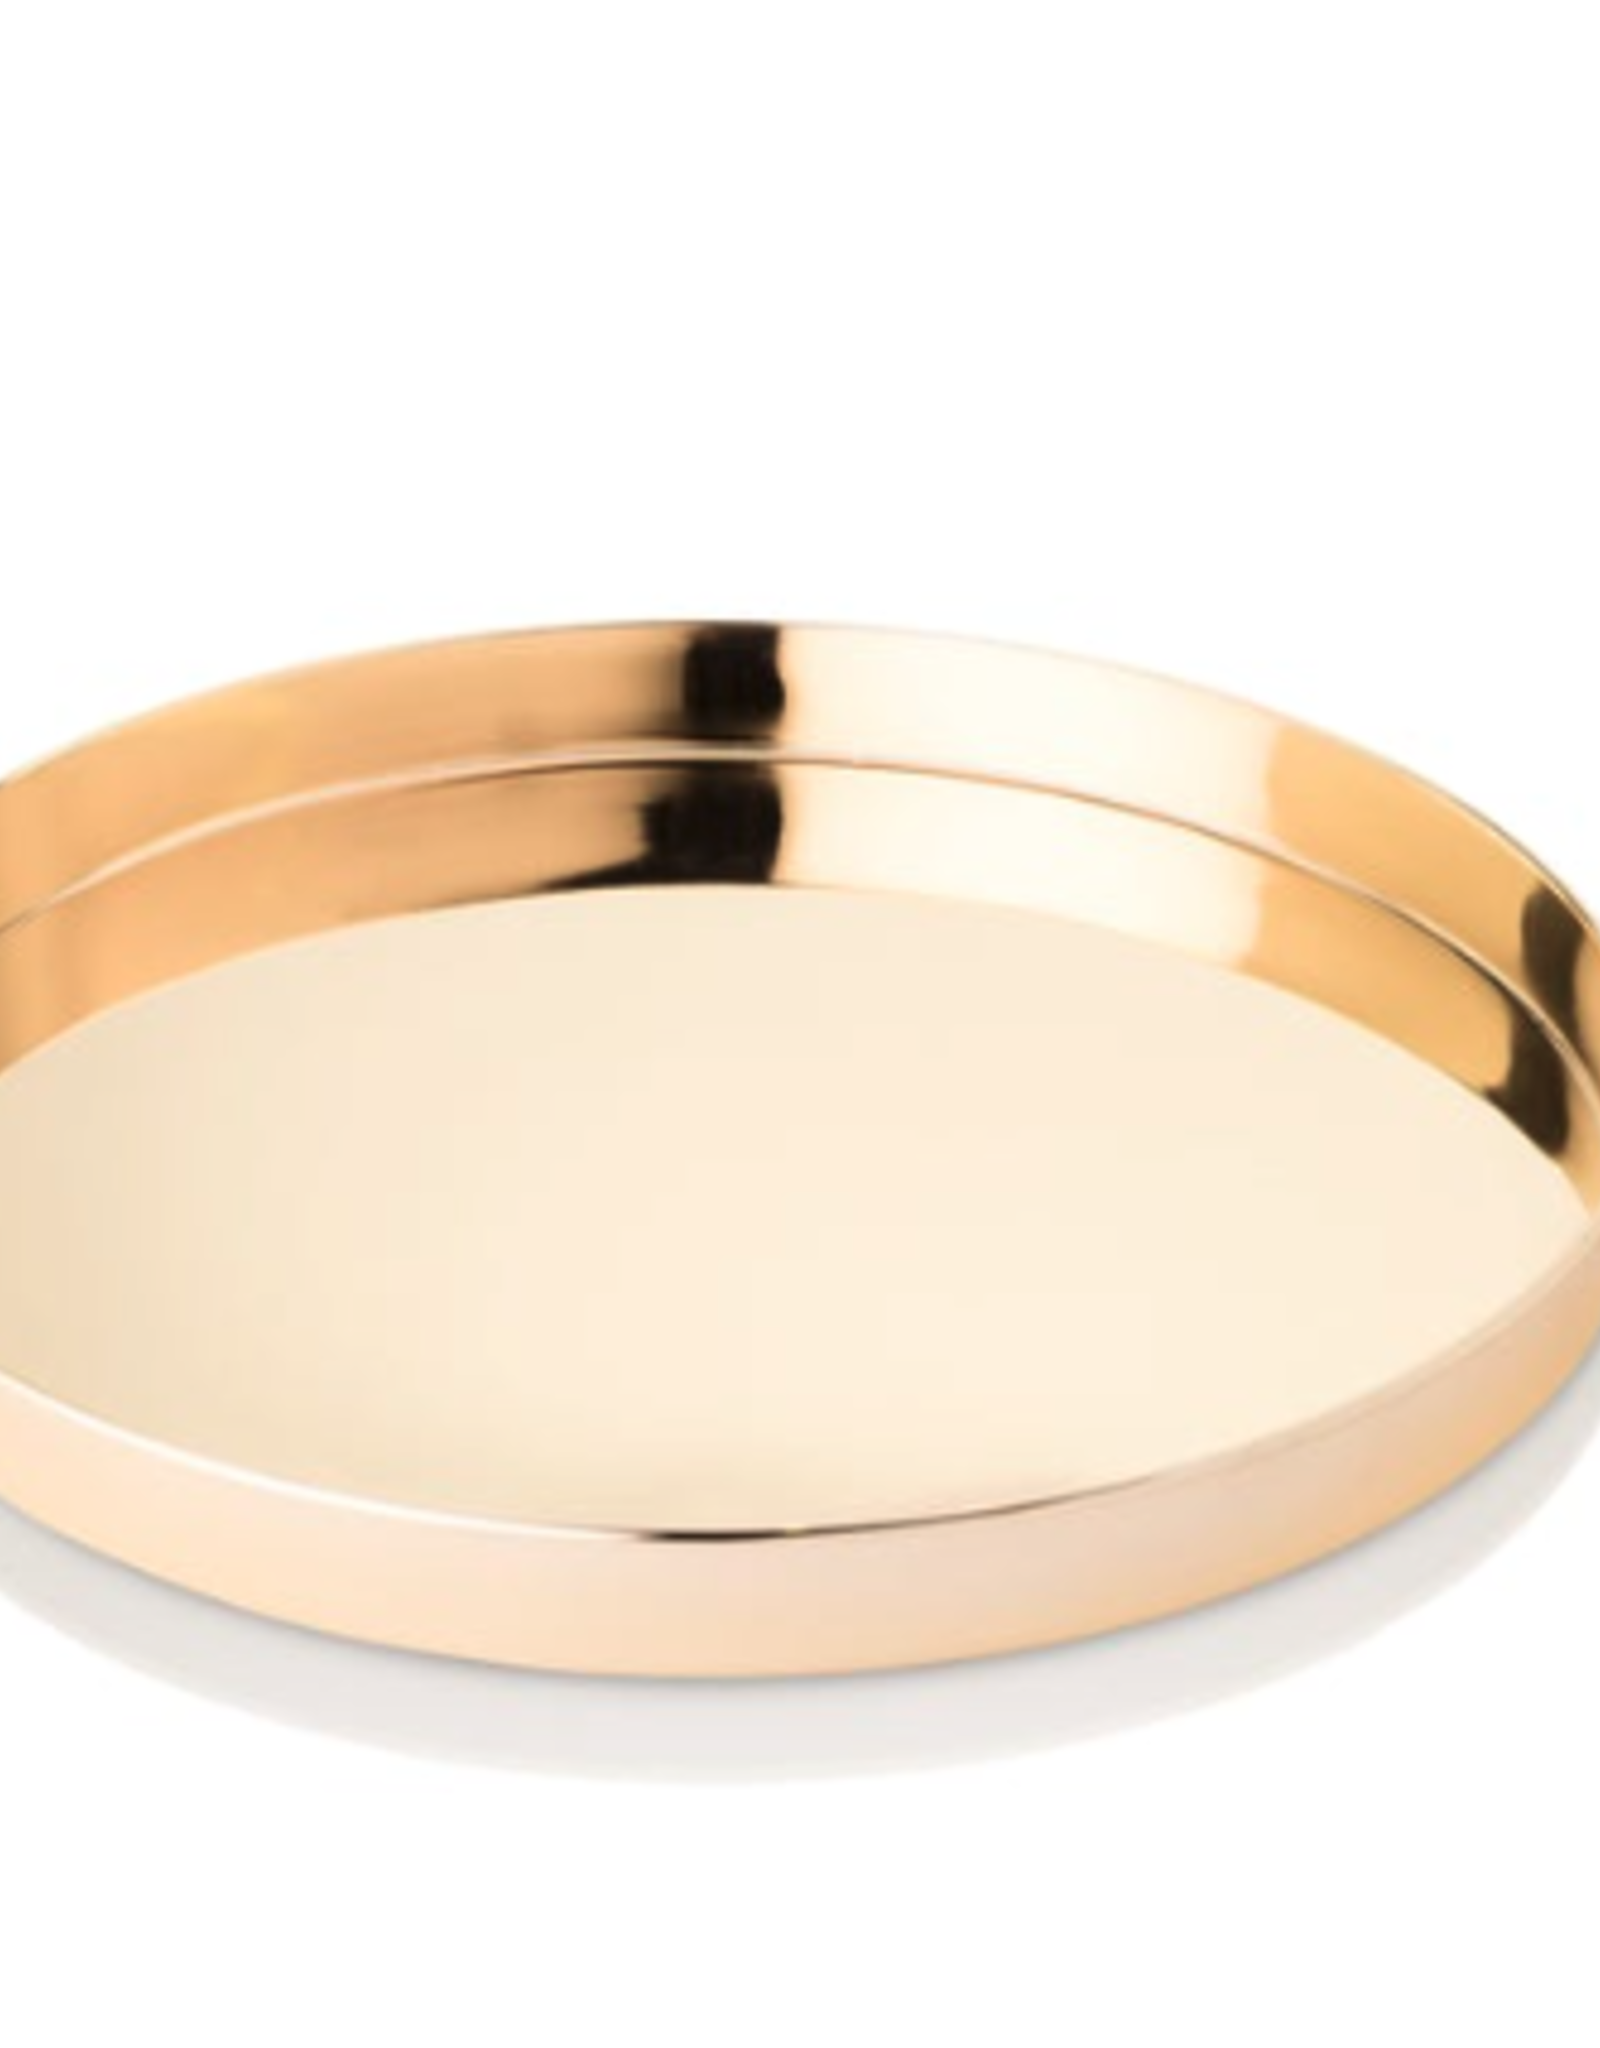 Gold Serving Tray D12.5"